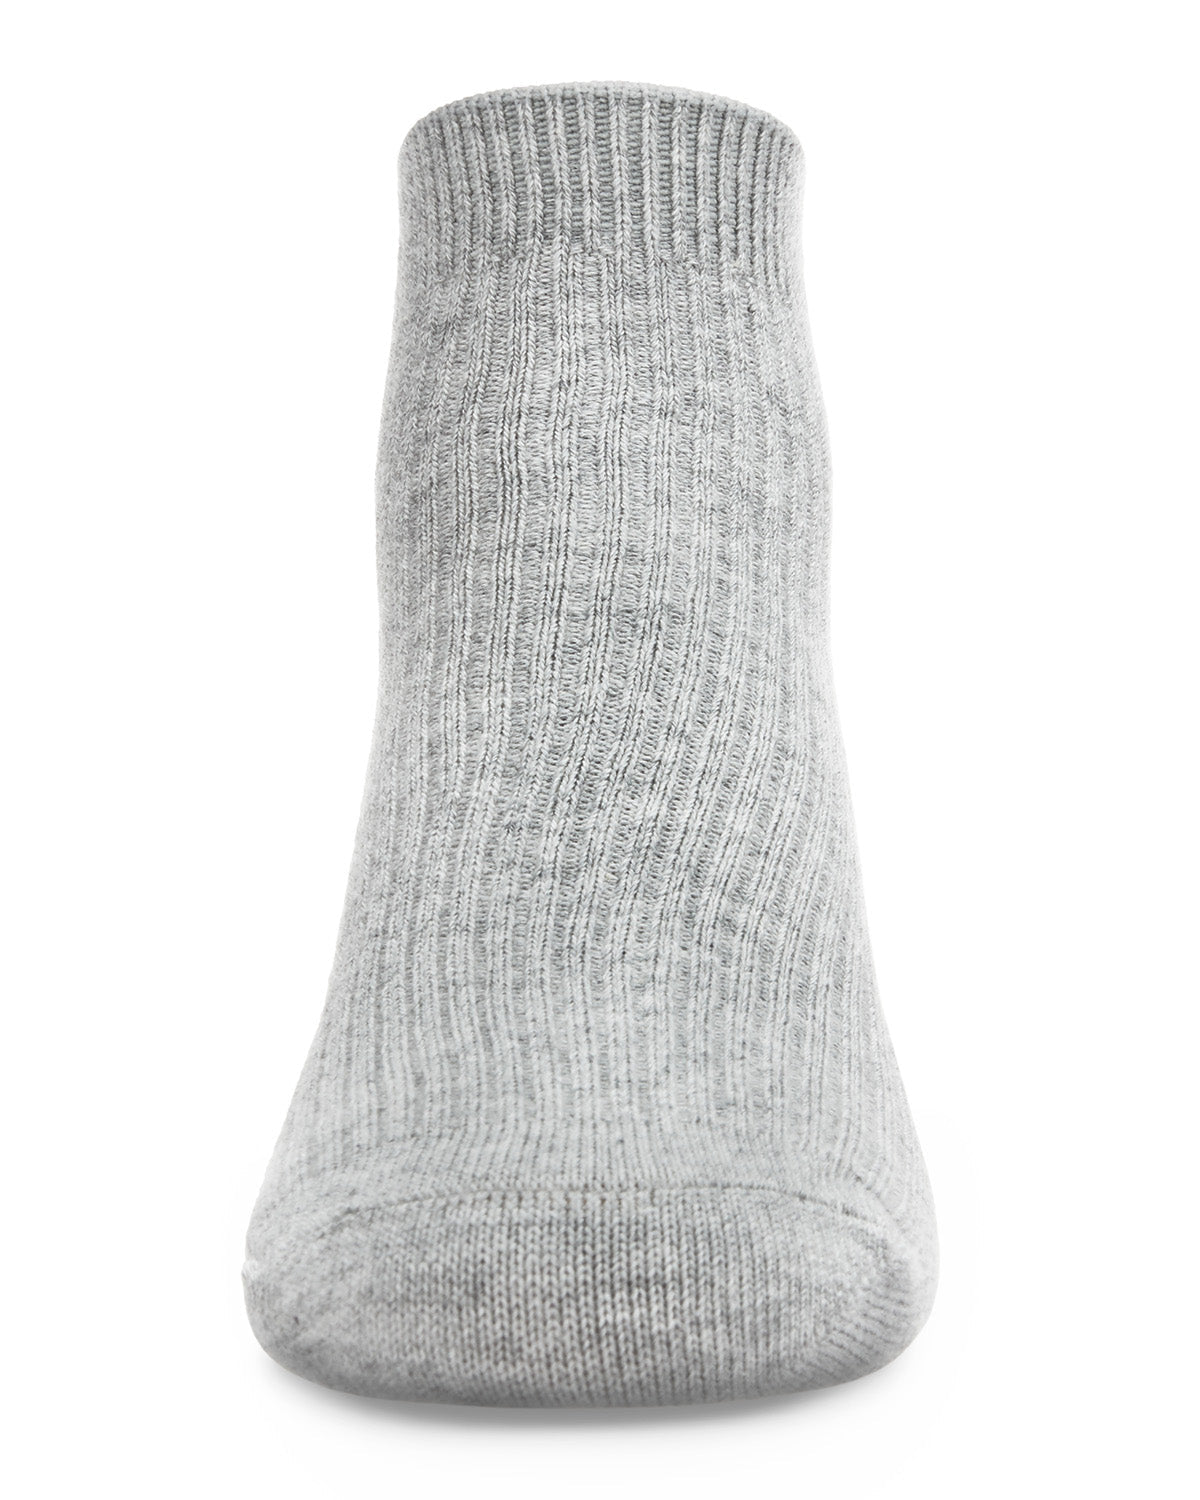 Thin Ribbed Cotton Kids Anklet Sock